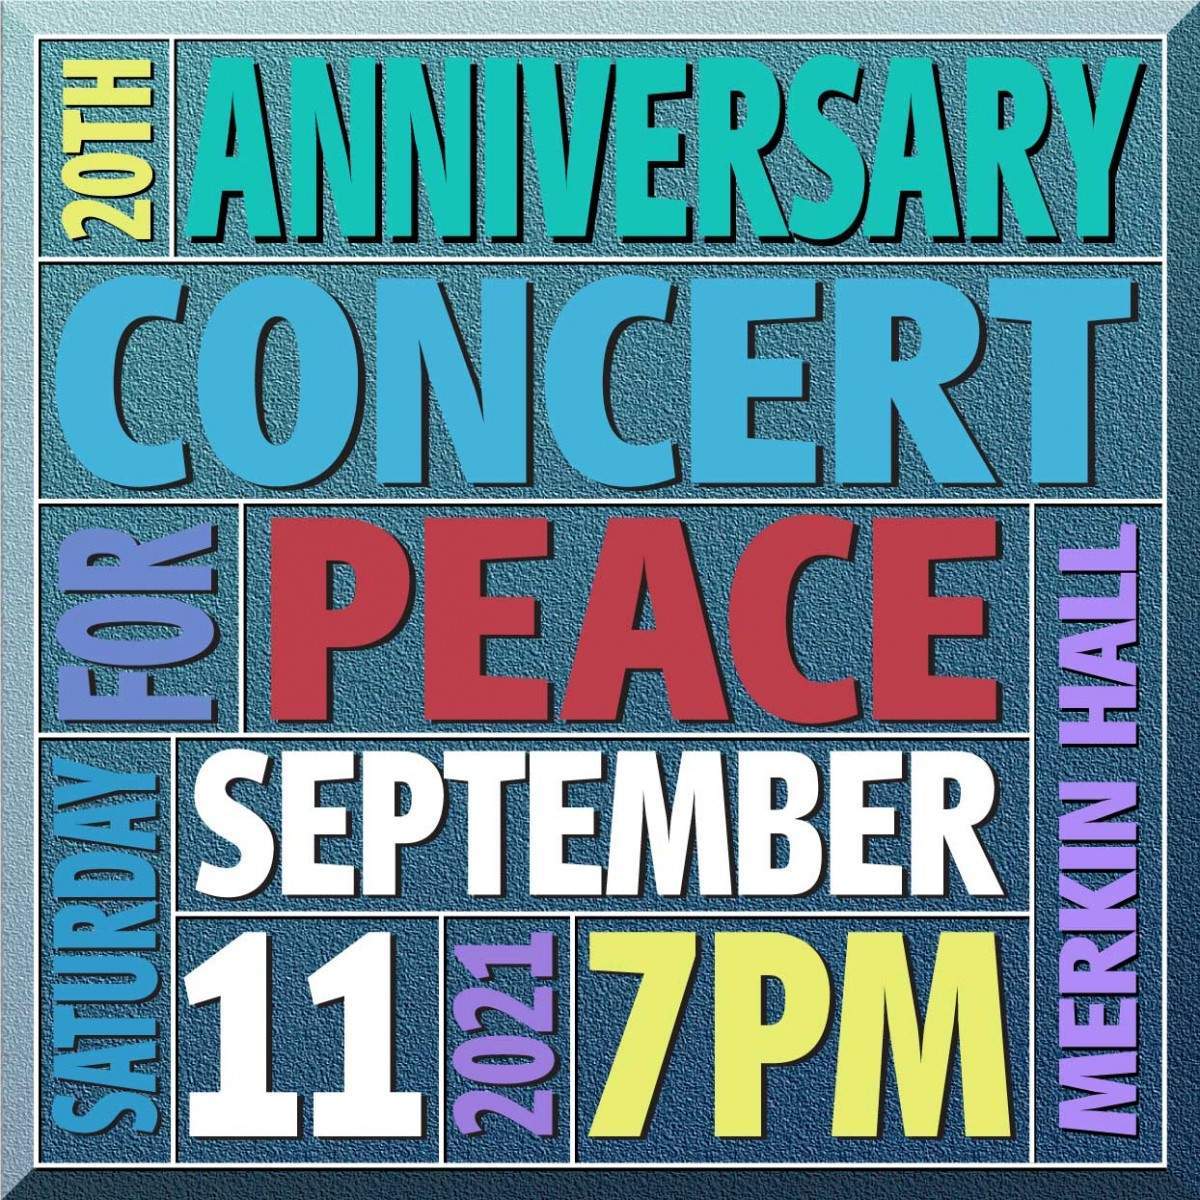 Musicians For Harmony 20th Anniversary “Concert for Peace” ArabishWay